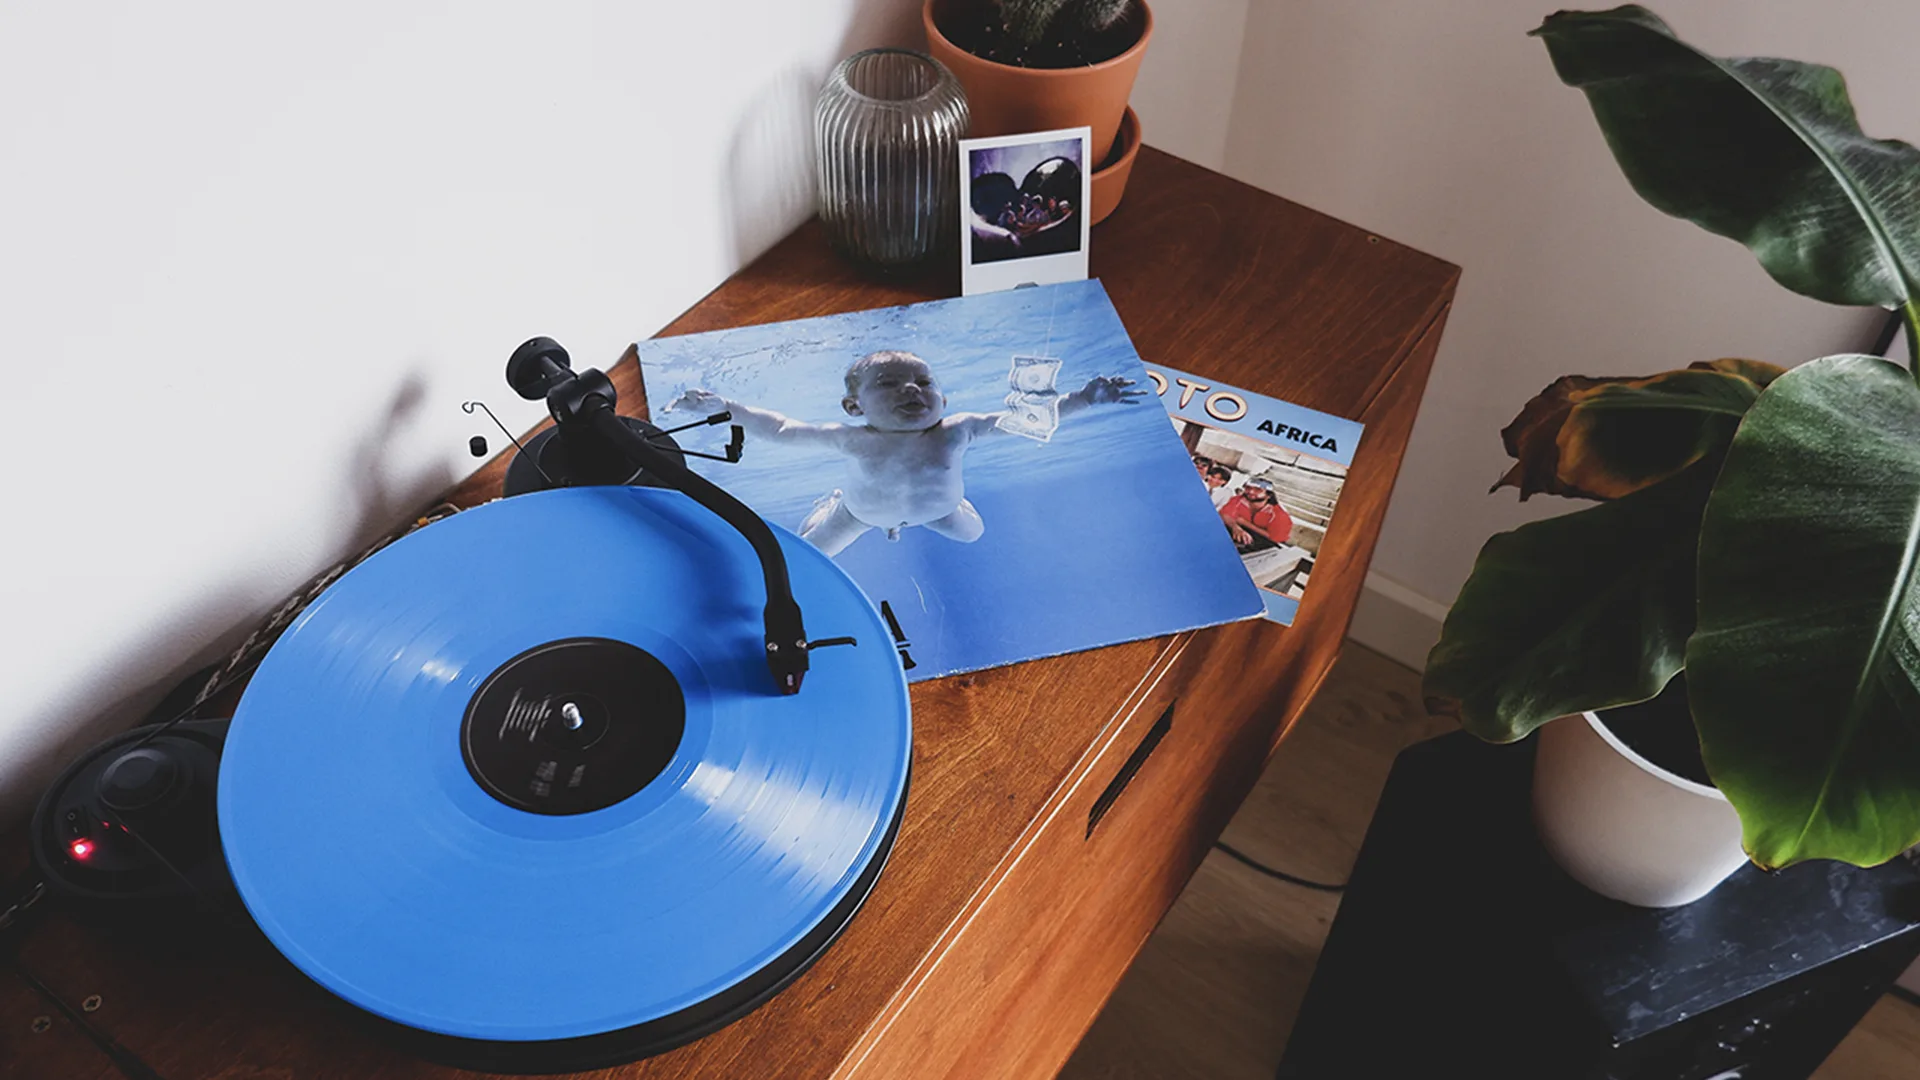 Nirvana album being played on a turntable